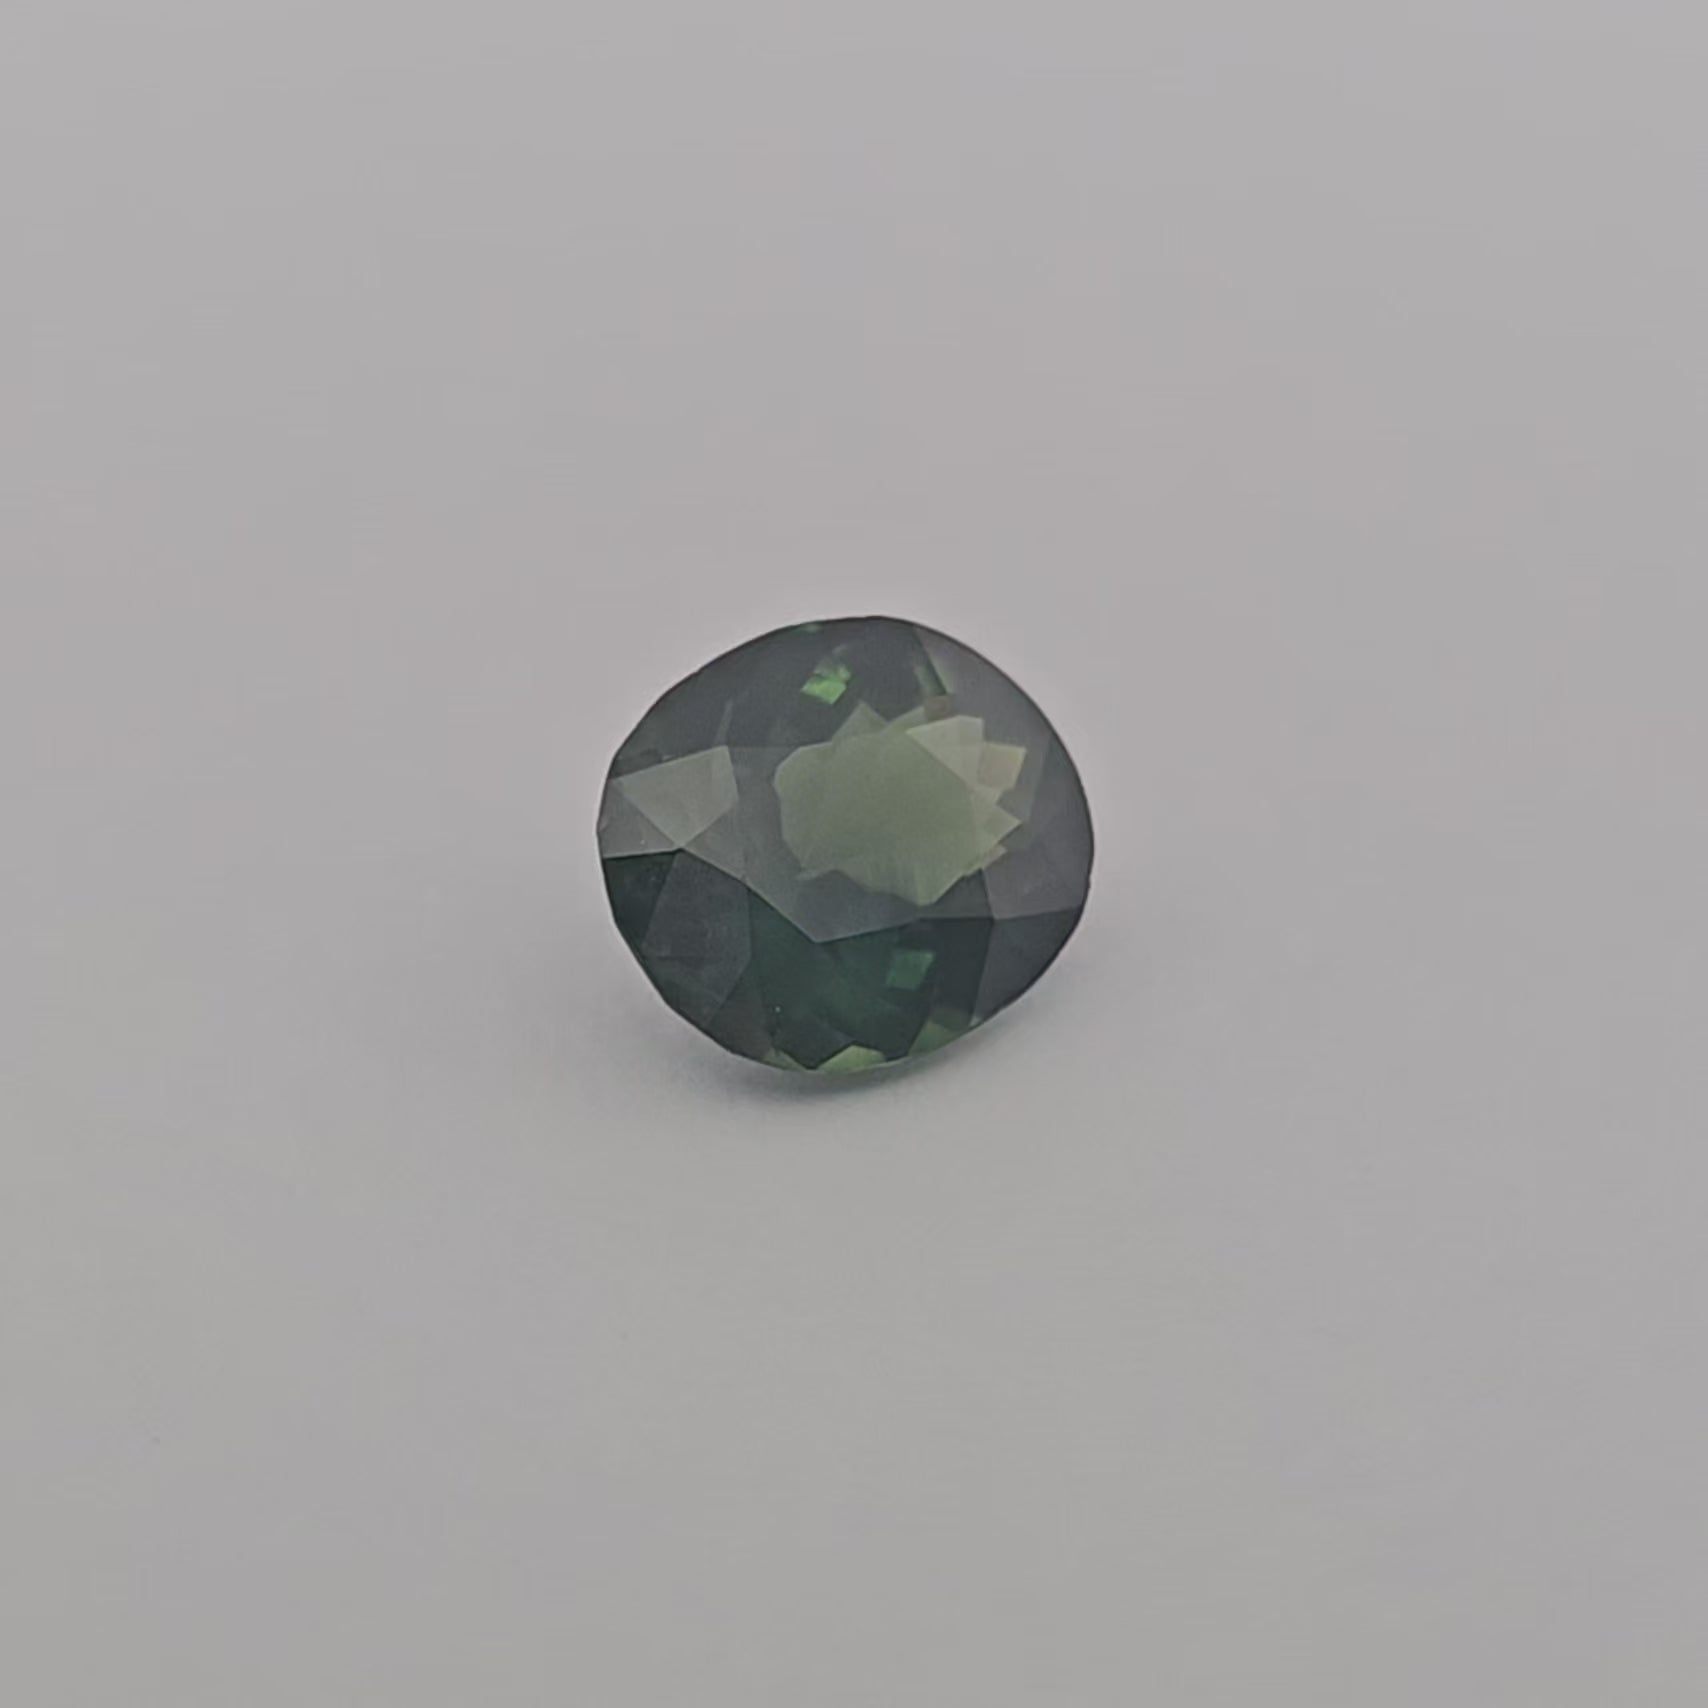 Natural Green Sapphire Stone 3.46 Carats Oval Shape